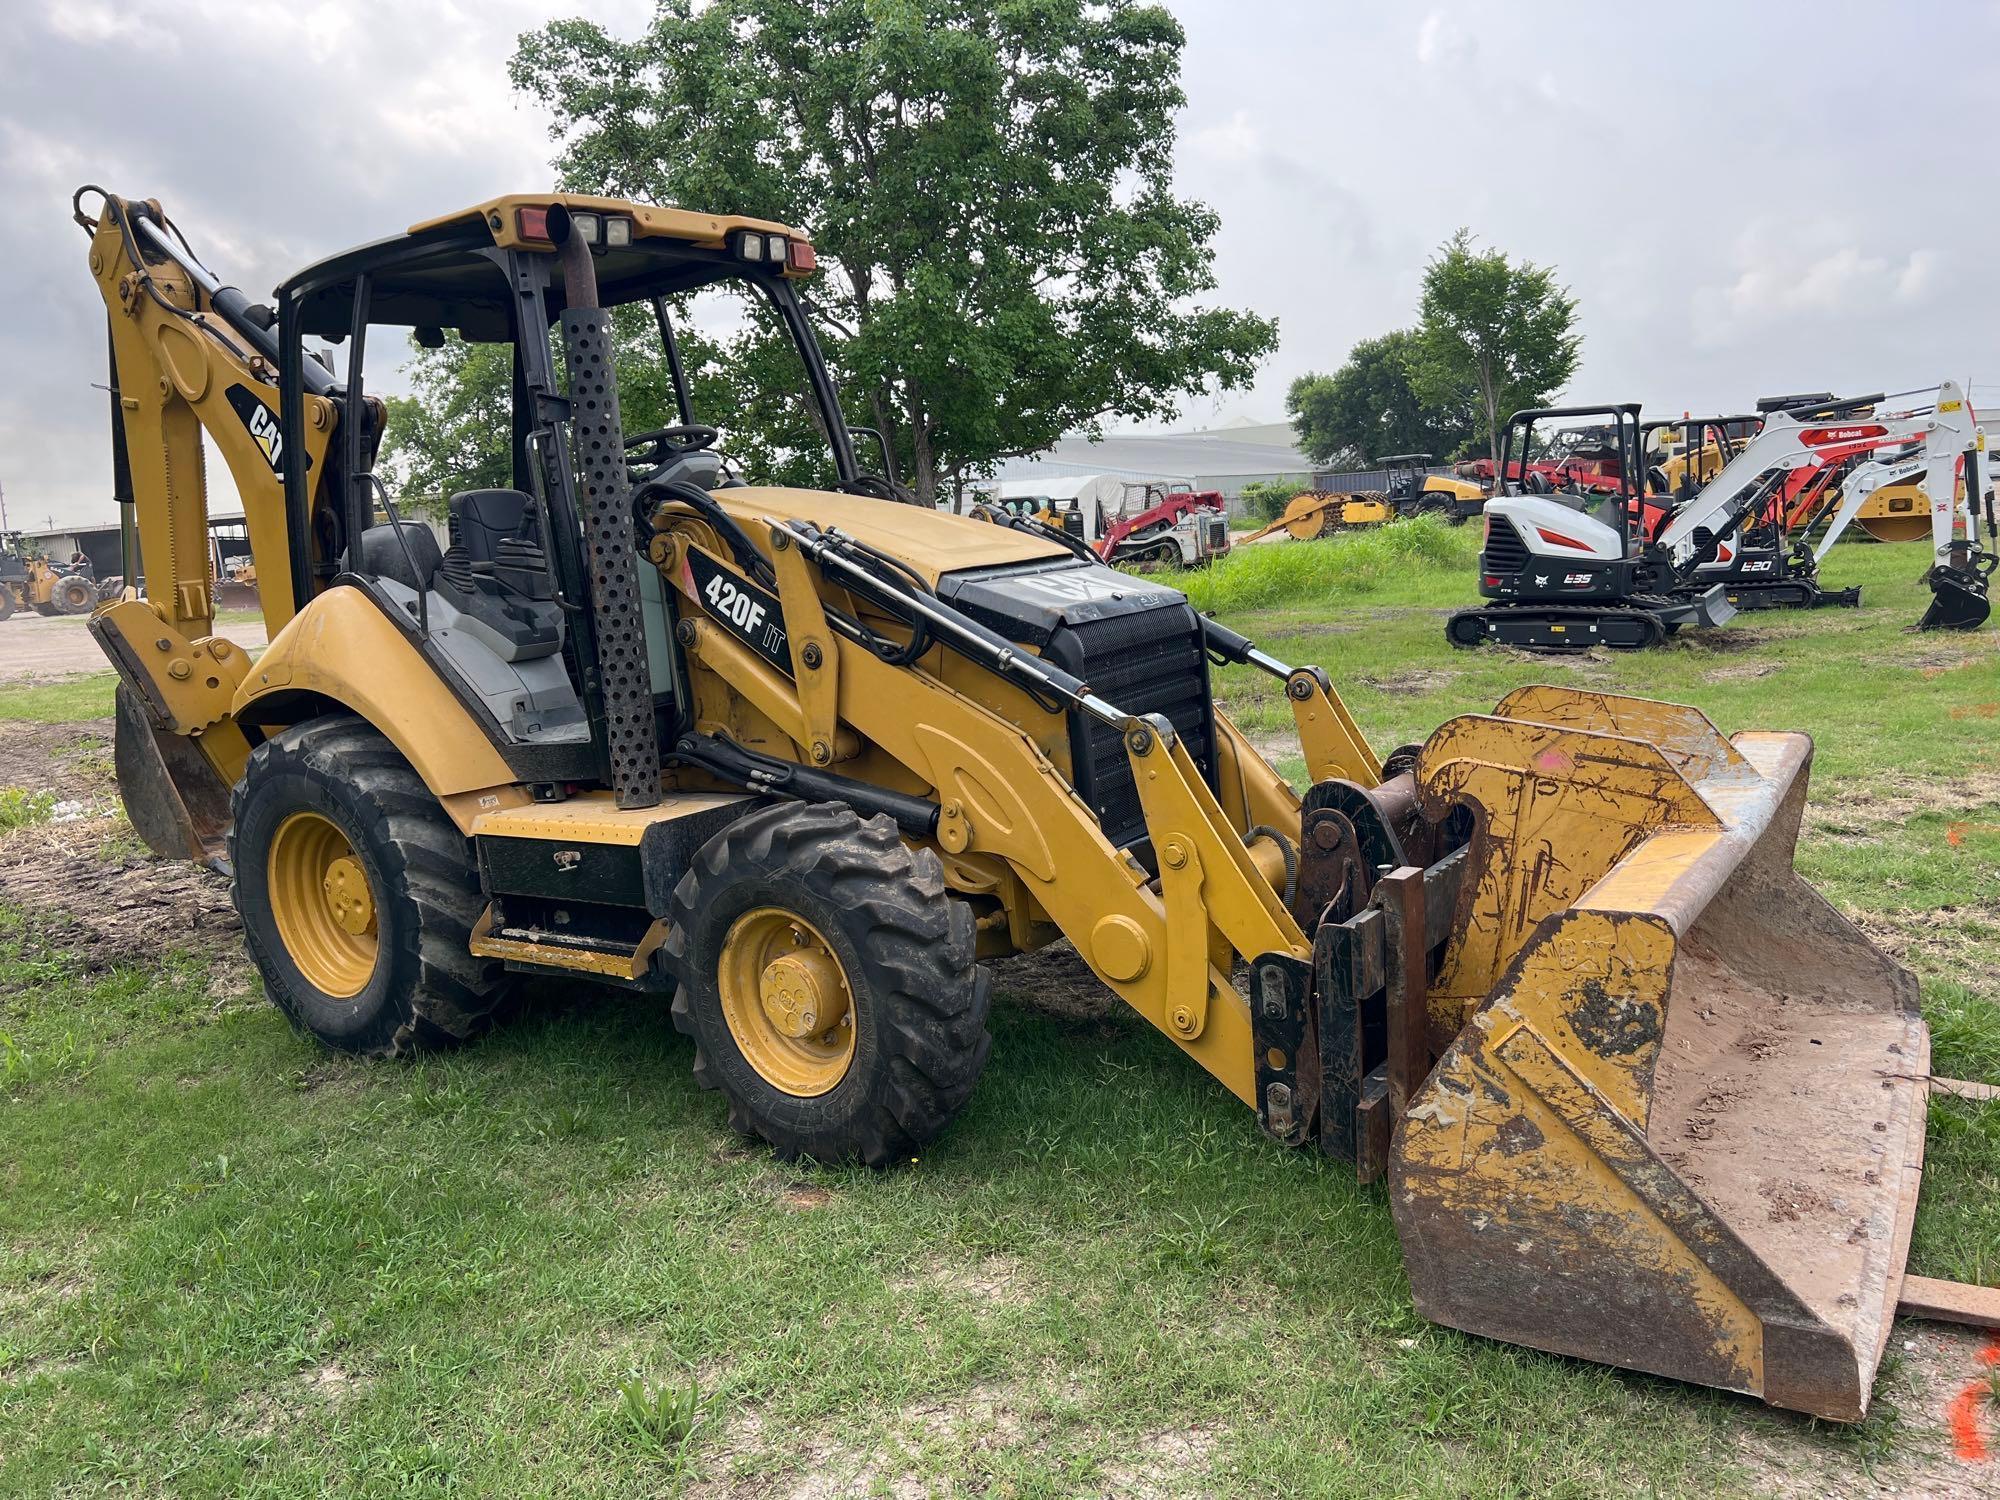 2013 CAT 420F2IT TRACTOR LOADER BACKHOE SN:JWJ01736 4x4, powered by Cat diesel engine, equipped with